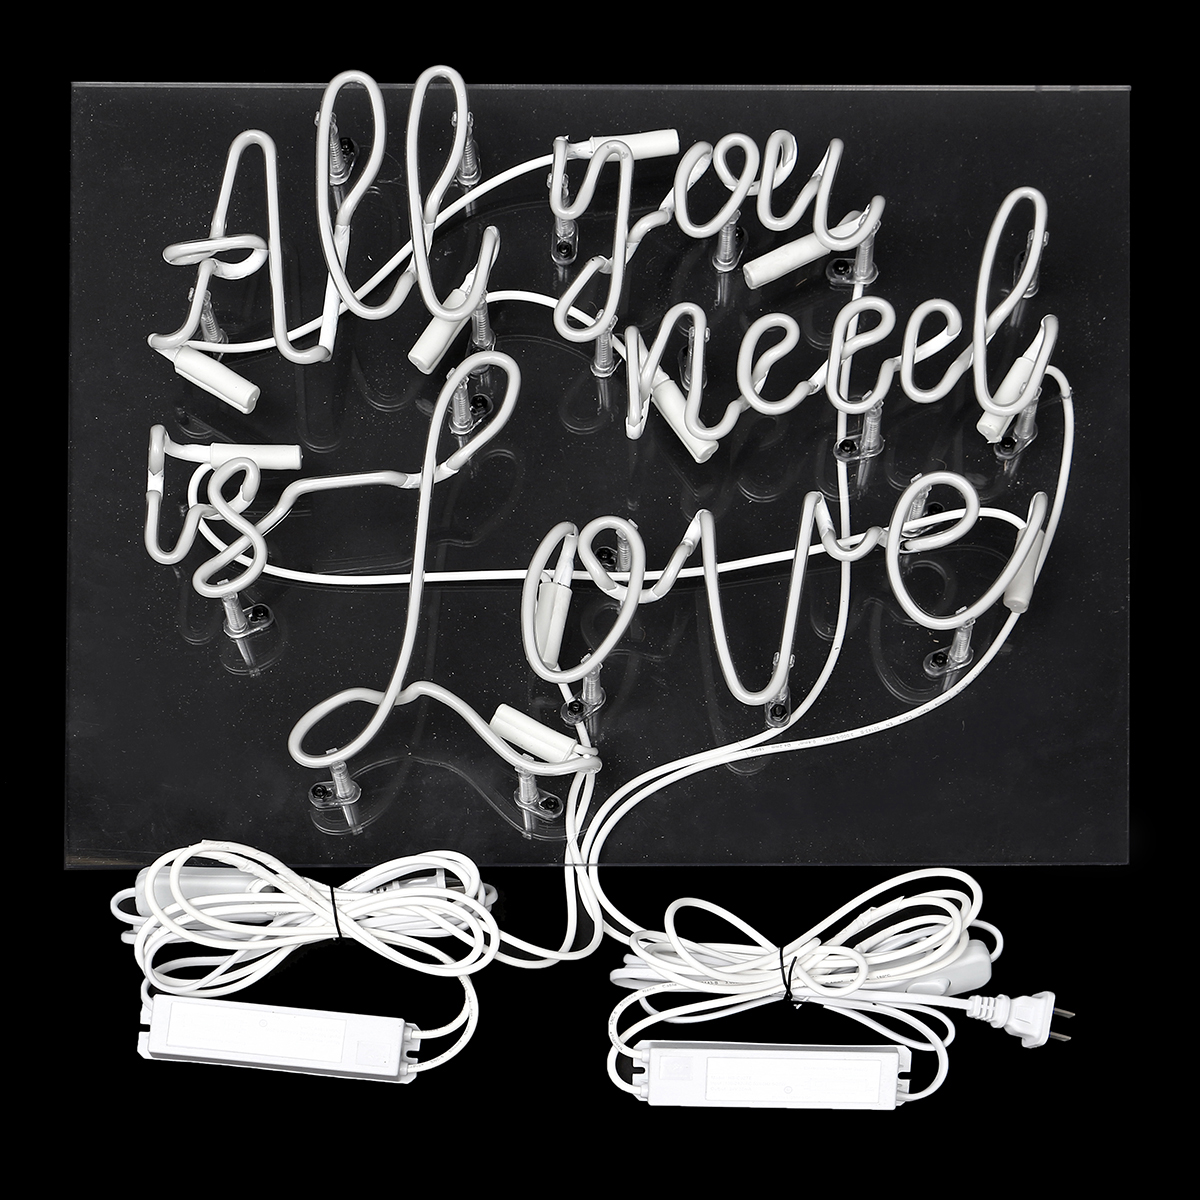 All-You-Need-Is-Love-Neon-Sign-For-Bedroom-Wall-Decor-Artwork-With-Dimmer-Decorations-1557205-3